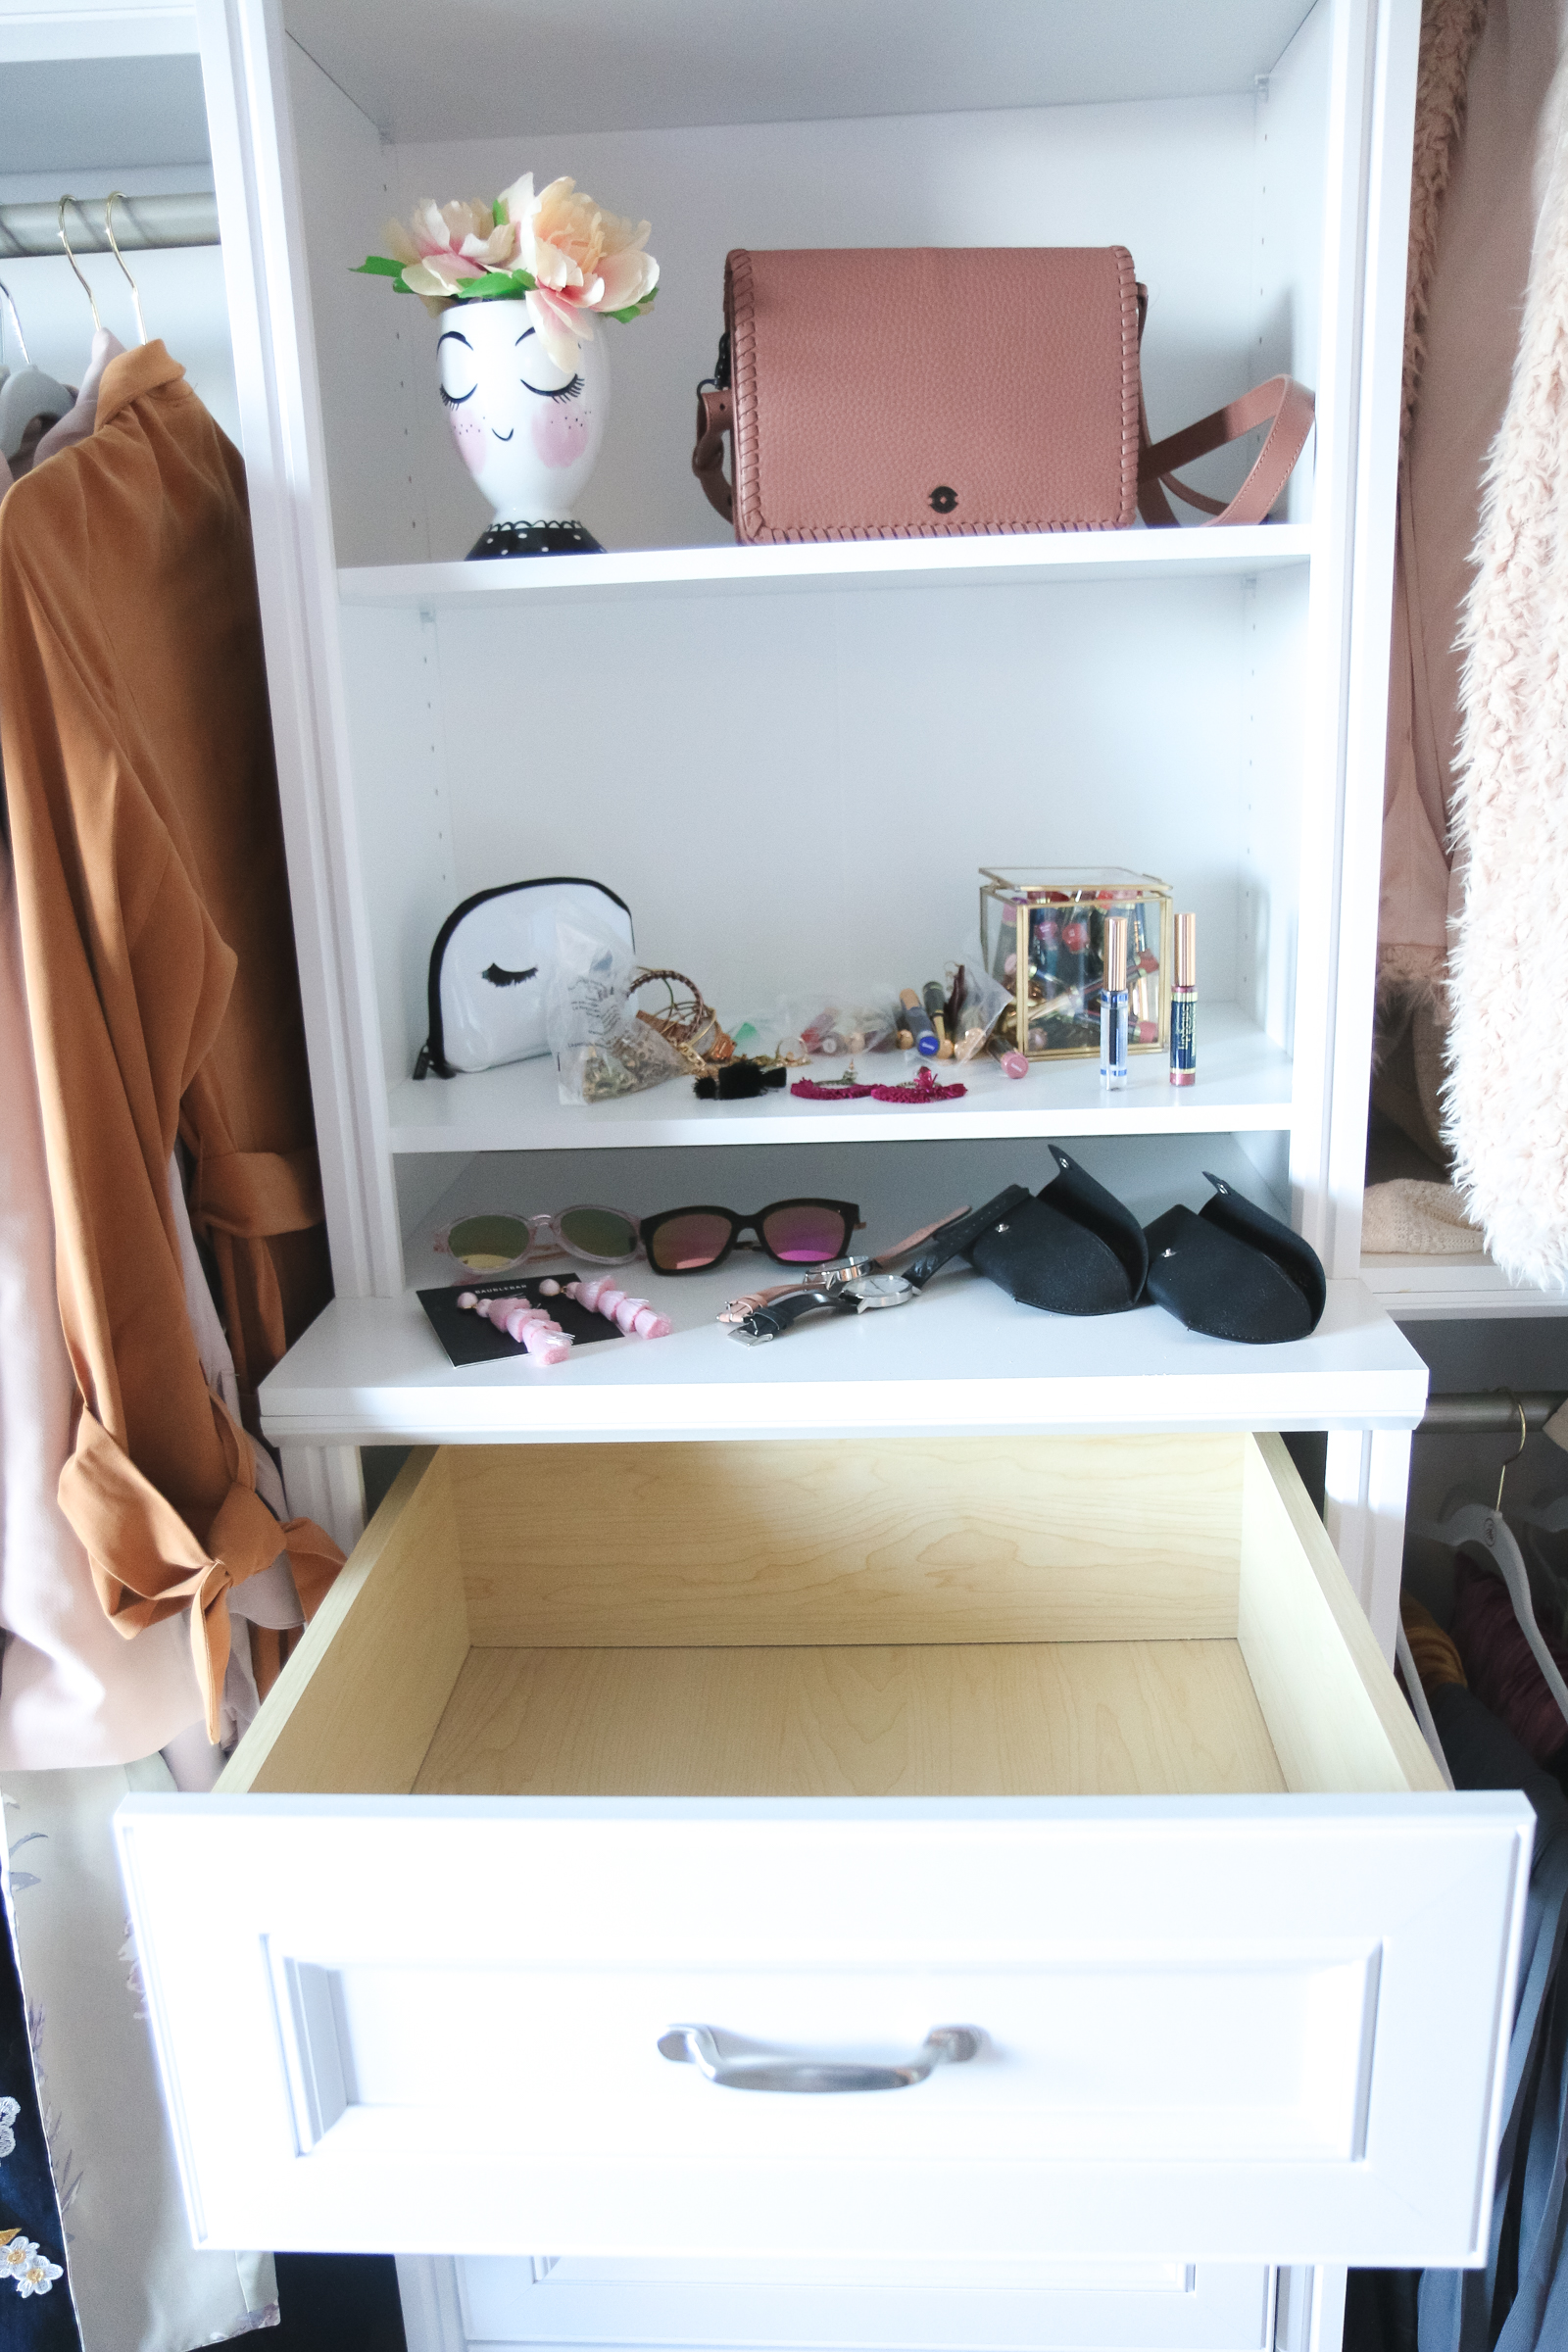 5 Tips From a Professional Organizer That Will Change Your Life by Utah lifestyle blogger Sandy A La Mode